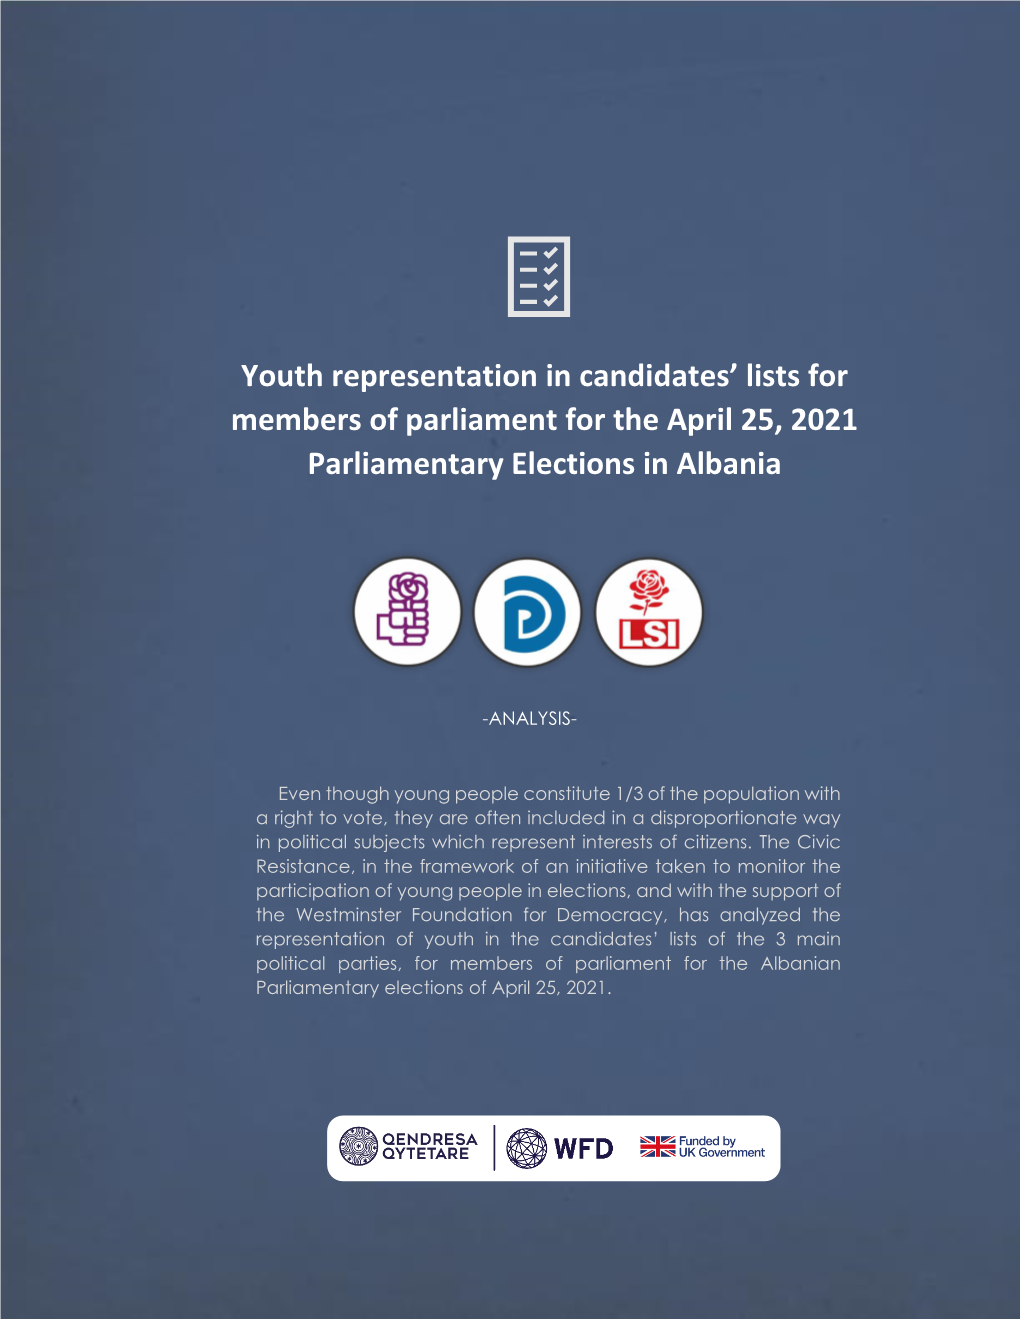 Youth Representation in Candidates' Lists for Members of Parliament for the April 25, 2021 Parliamentary Elections in Albania